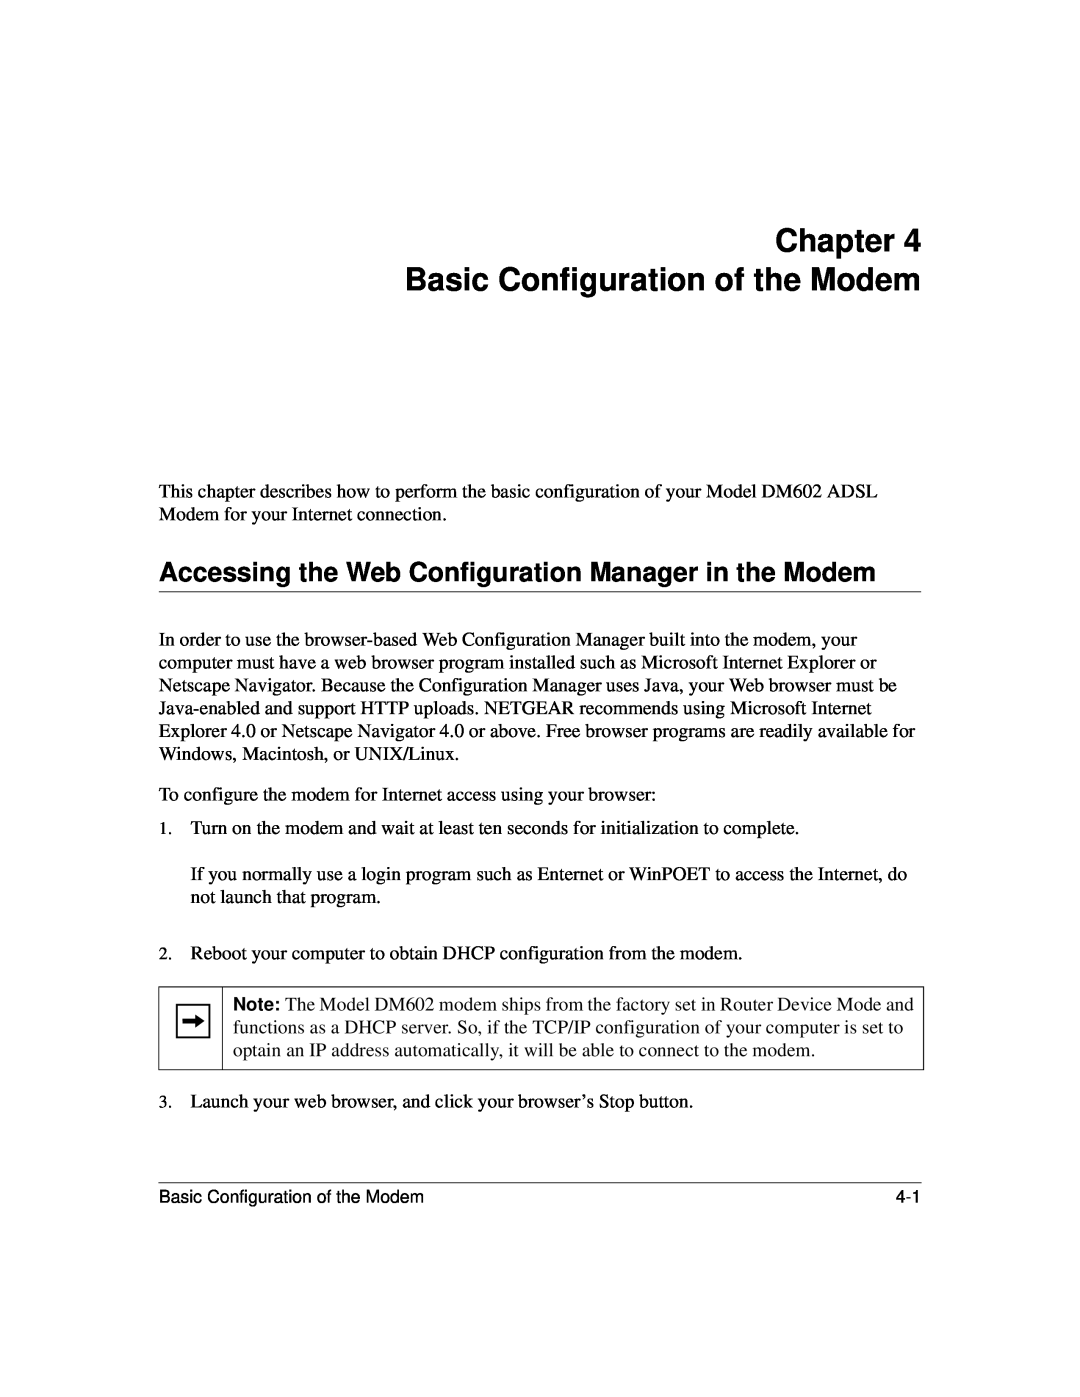 NETGEAR DM602 manual Chapter Basic Configuration of the Modem, Accessing the Web Configuration Manager in the Modem 